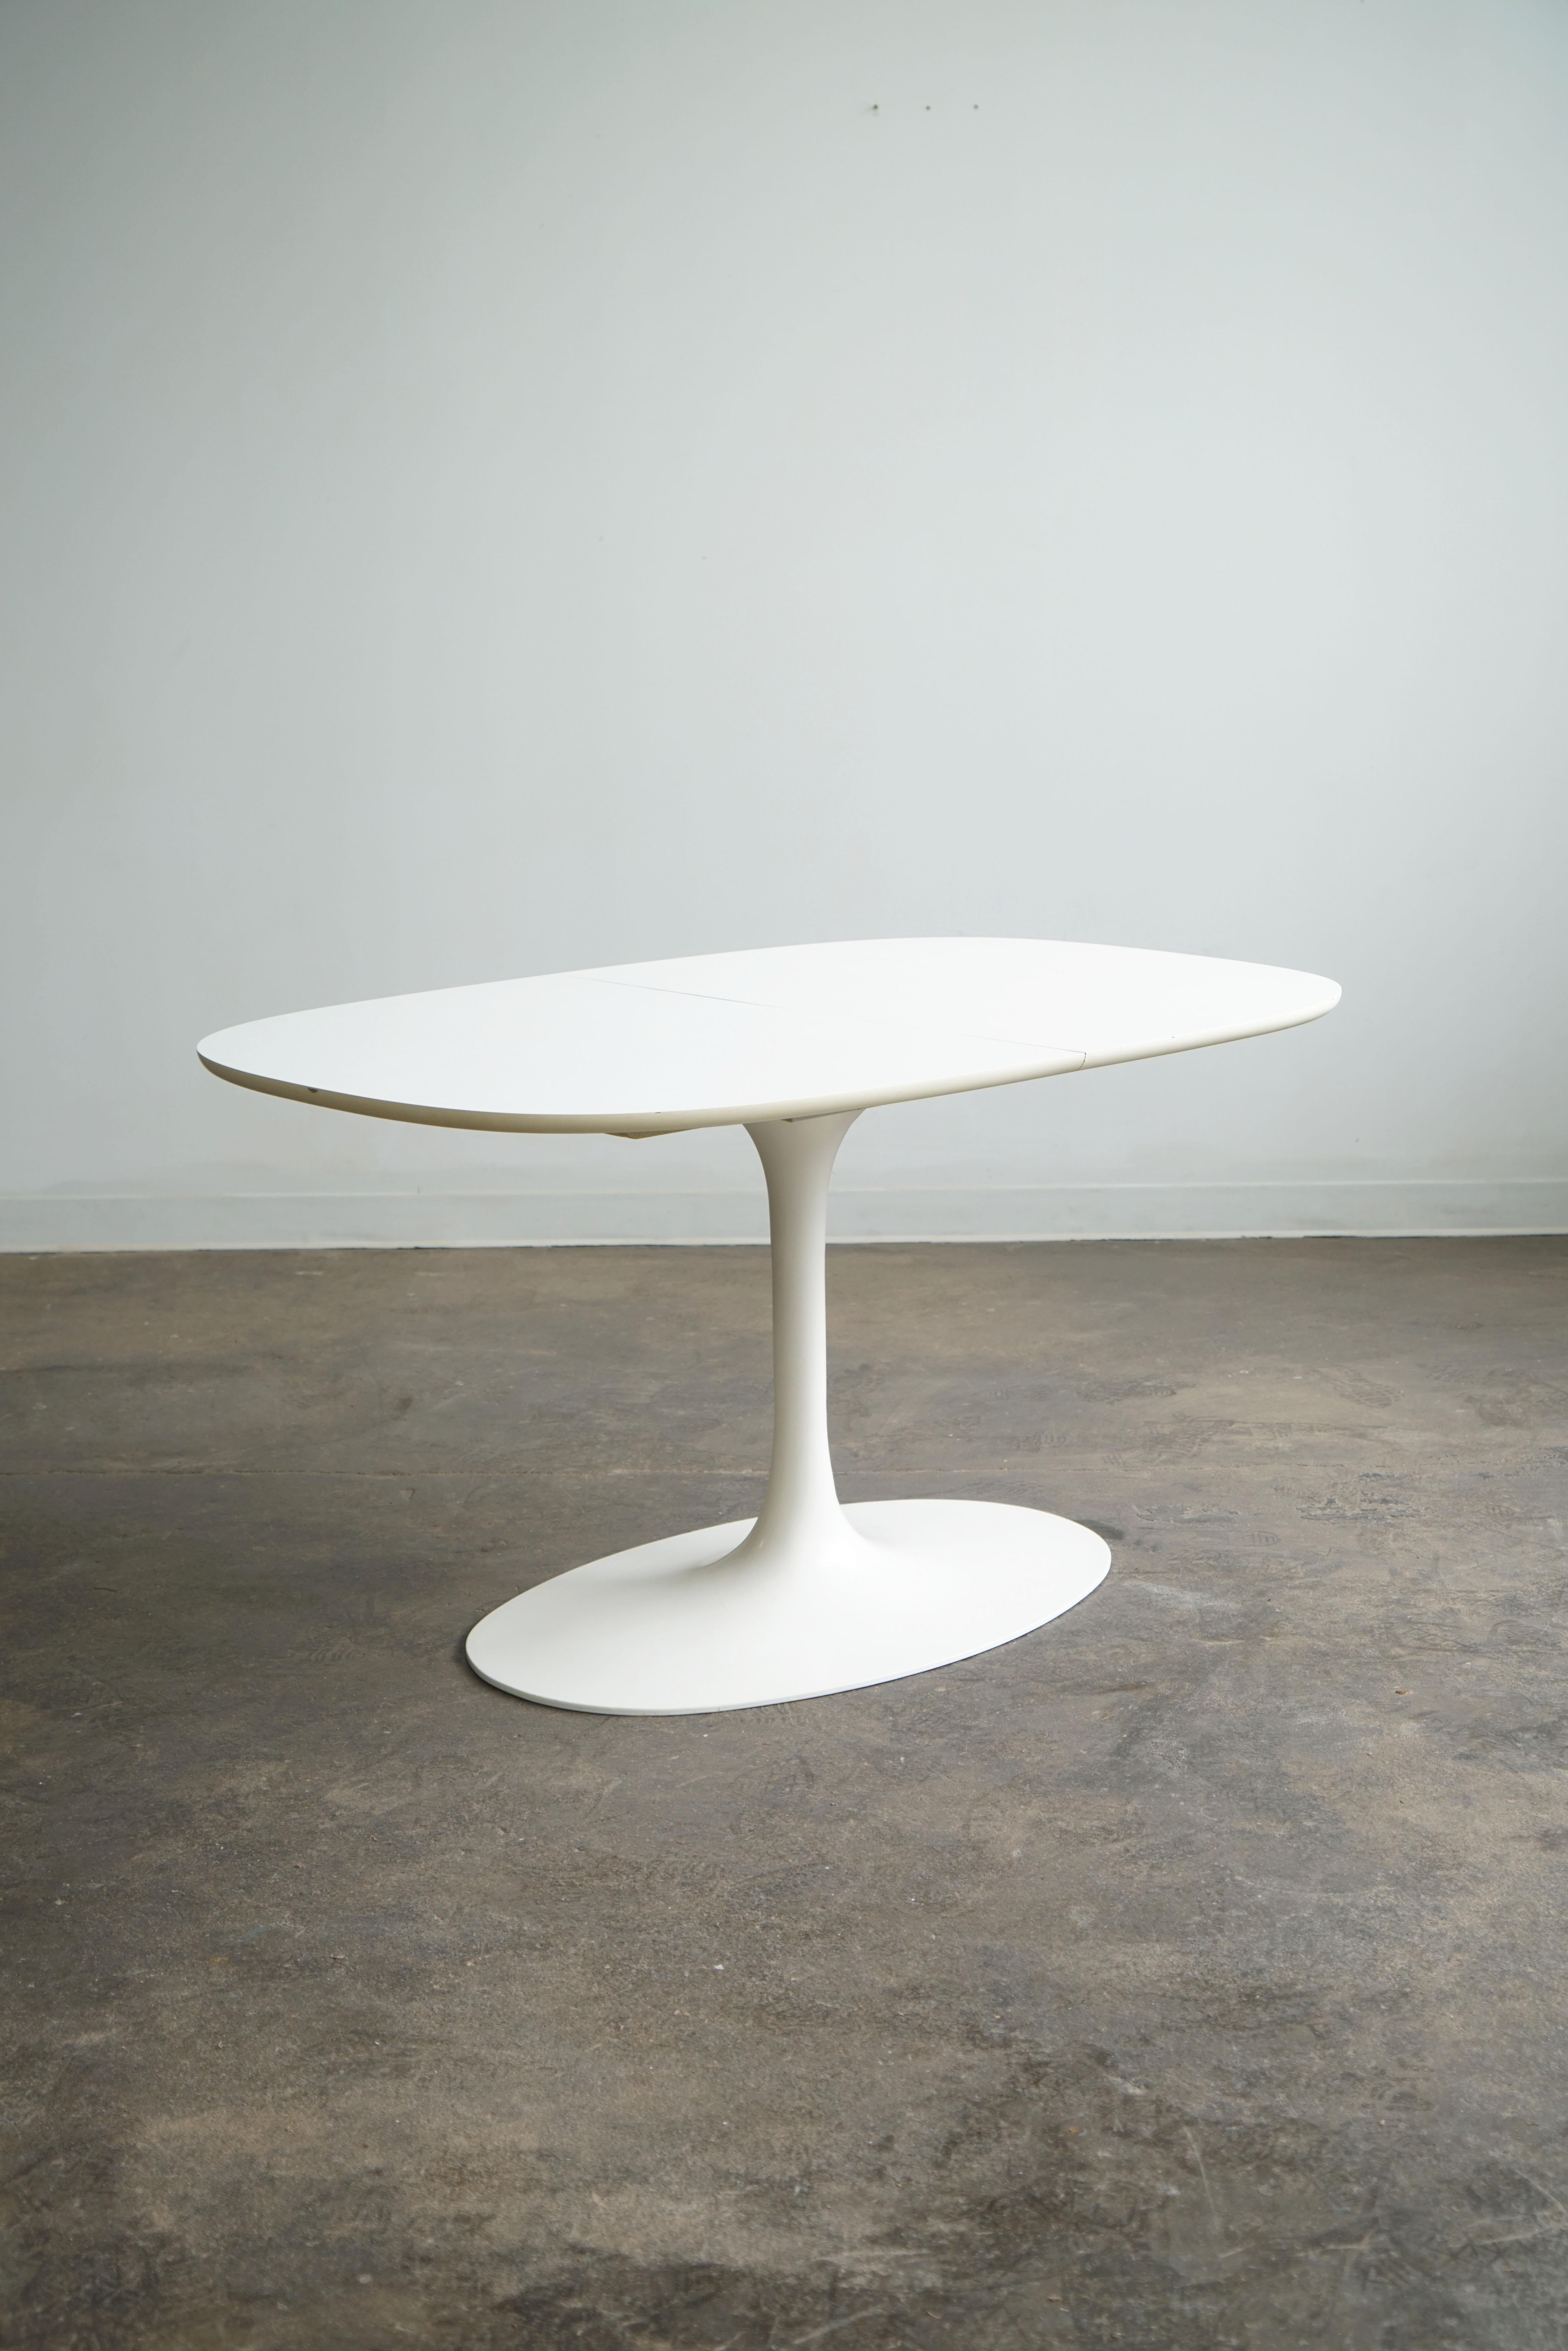 Tulip Style Dining table in the manner of Eero Saarinen.
Racetrack oval shaped laminate top.
57